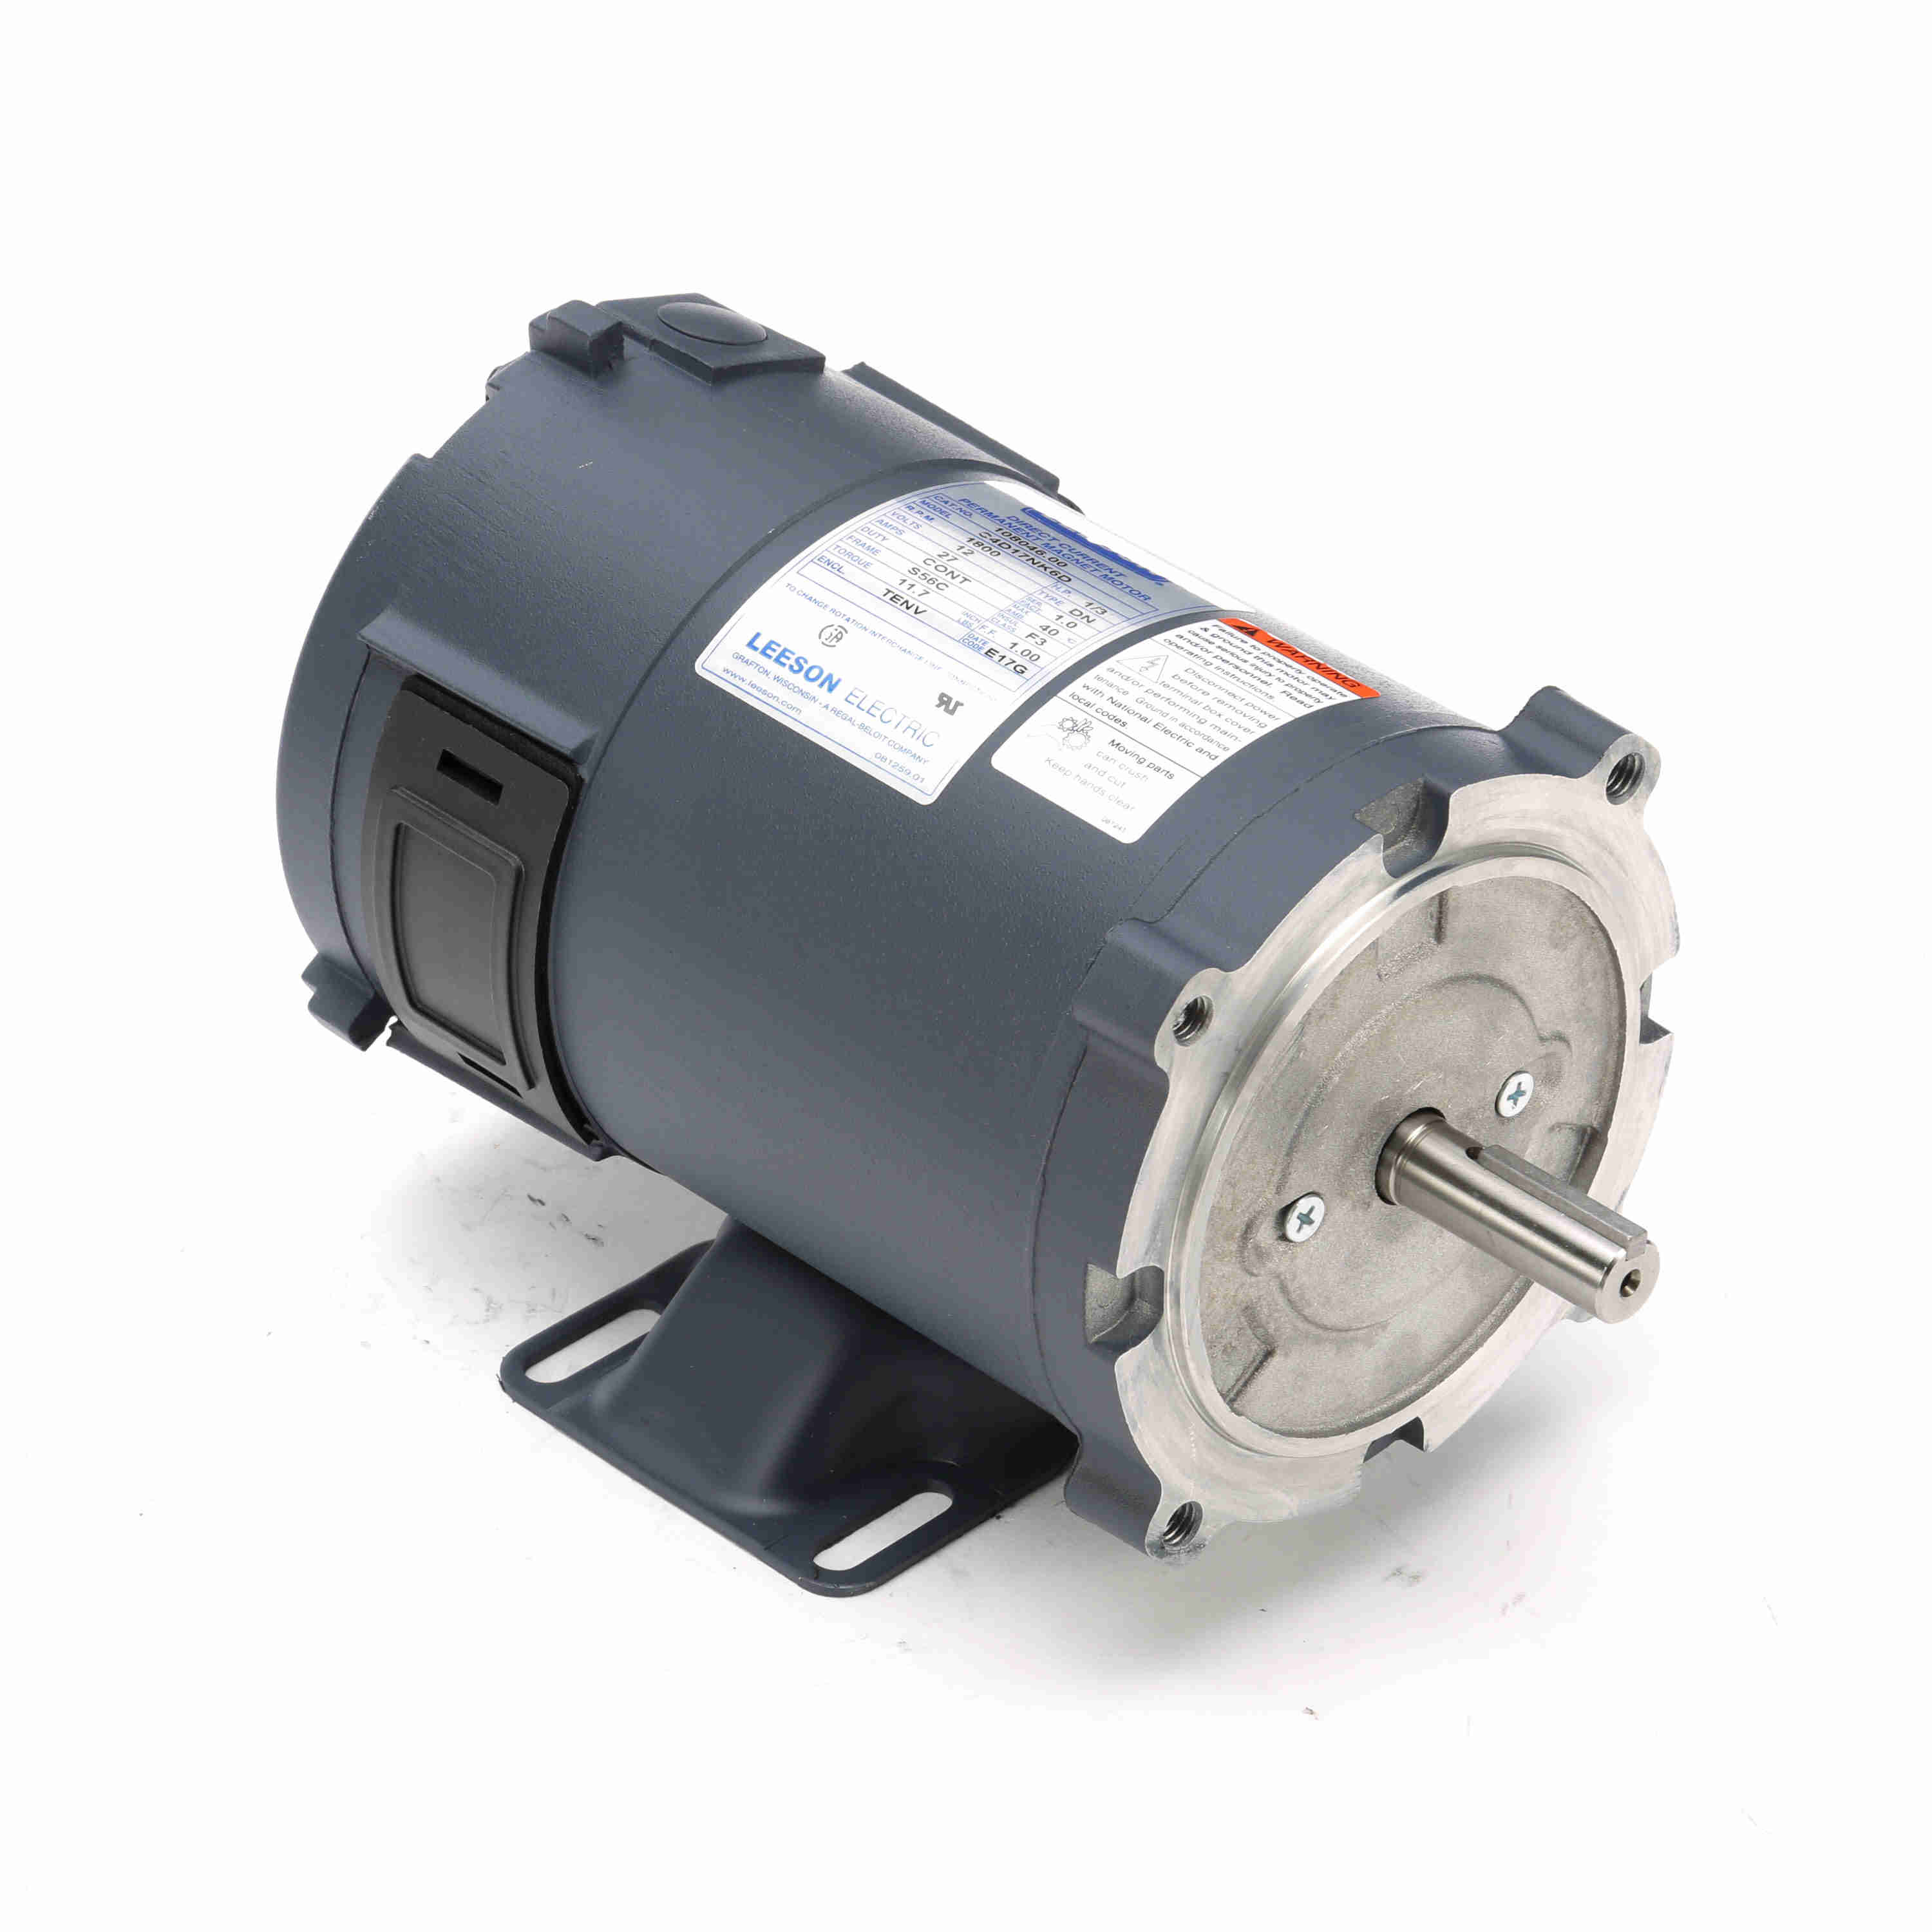 108046.00 Leeson 1/3HP Low Voltage DC Electric Motor, 1800RPM 1